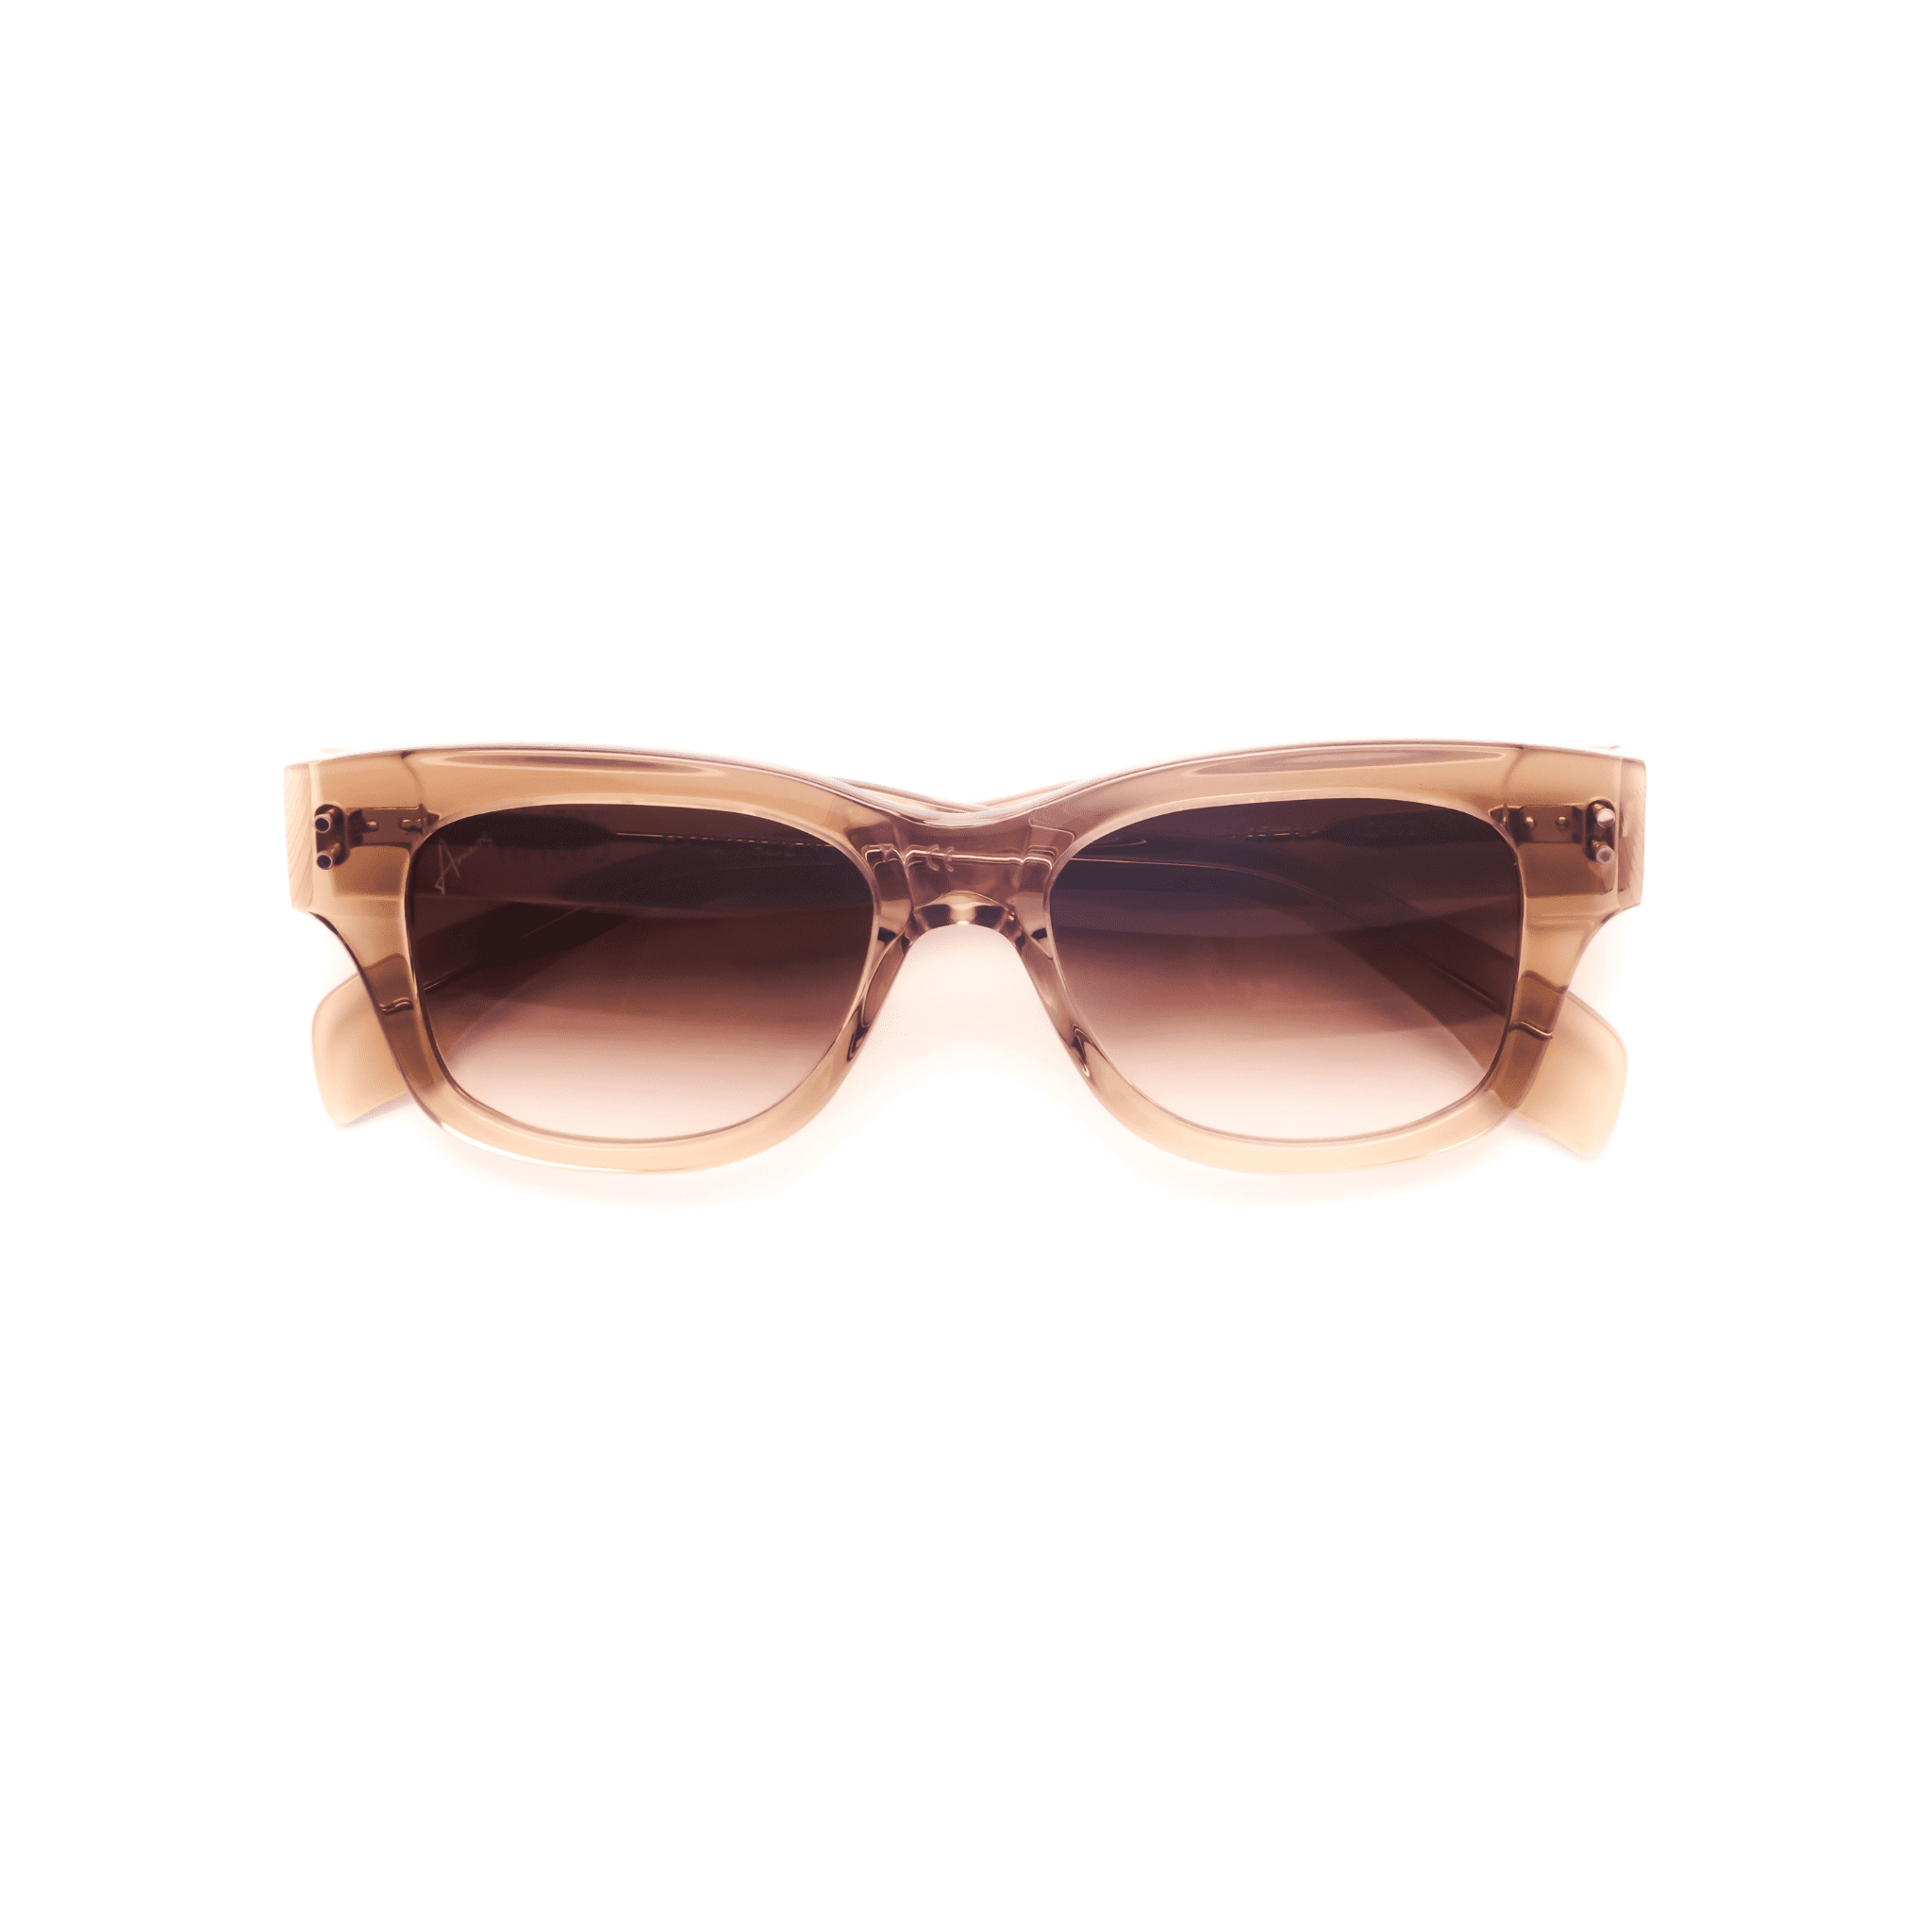 Ameos Forever collection Lou model. Beige transparent frames with brown lenses. Front view temples crossed. Genderless, gender neutral eyewear